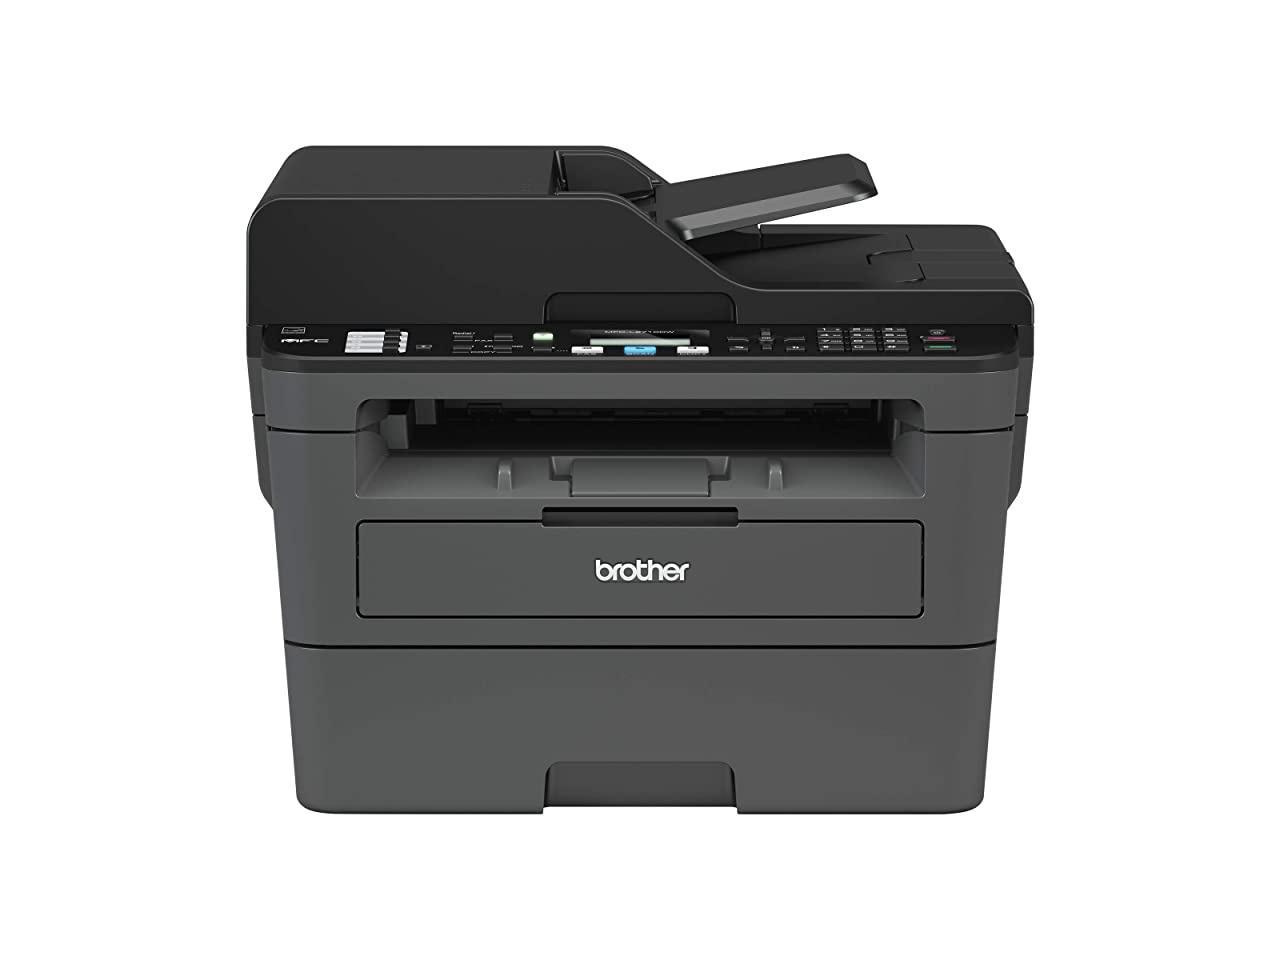 Factory Refurbished Brother RMFCL2710DW Monochrome Laser All-in-One Printer with Duplex Printing and Wireless Networking $139.99